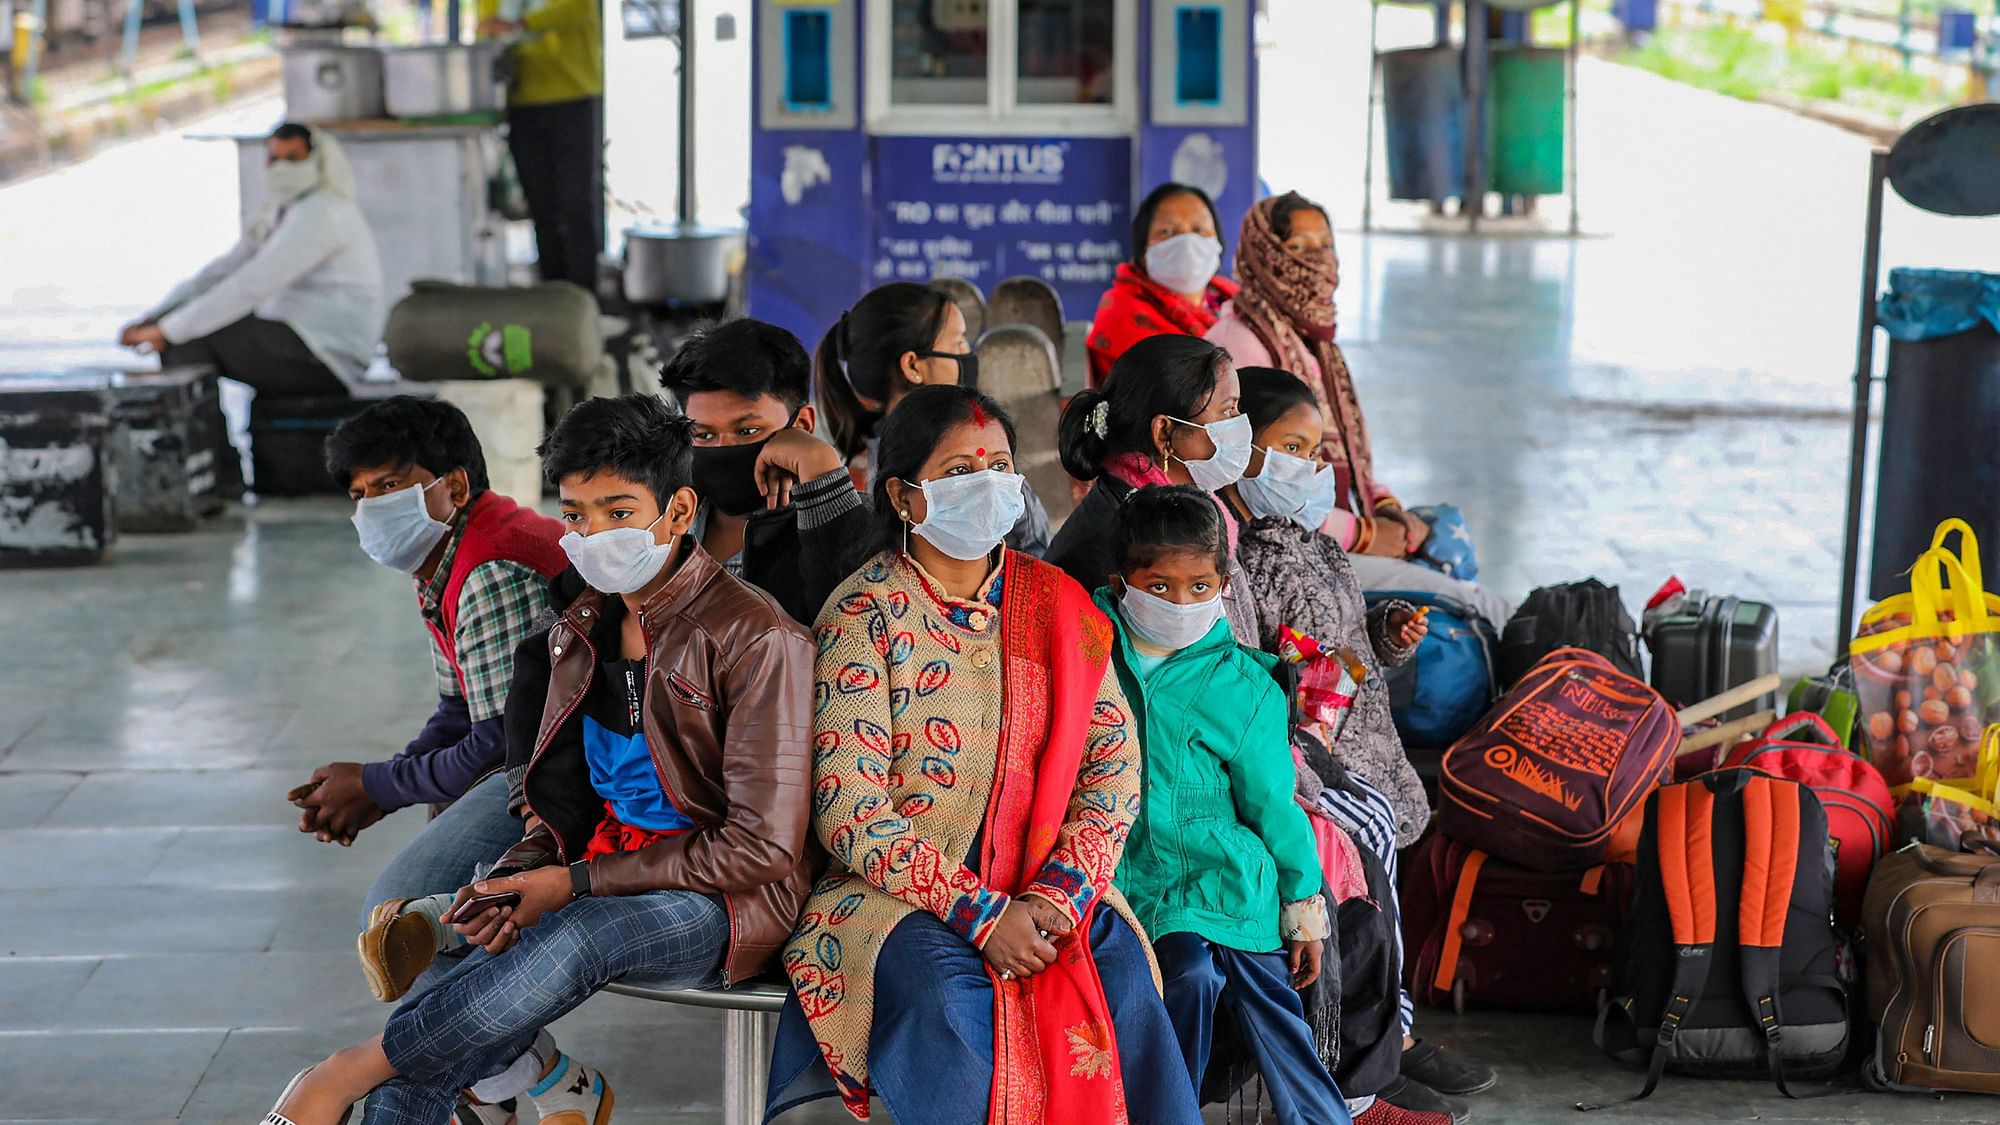 Passengers wearing protective face masks wait at a railway station following cancellation of trains in the wake of coronavirus pandemic.